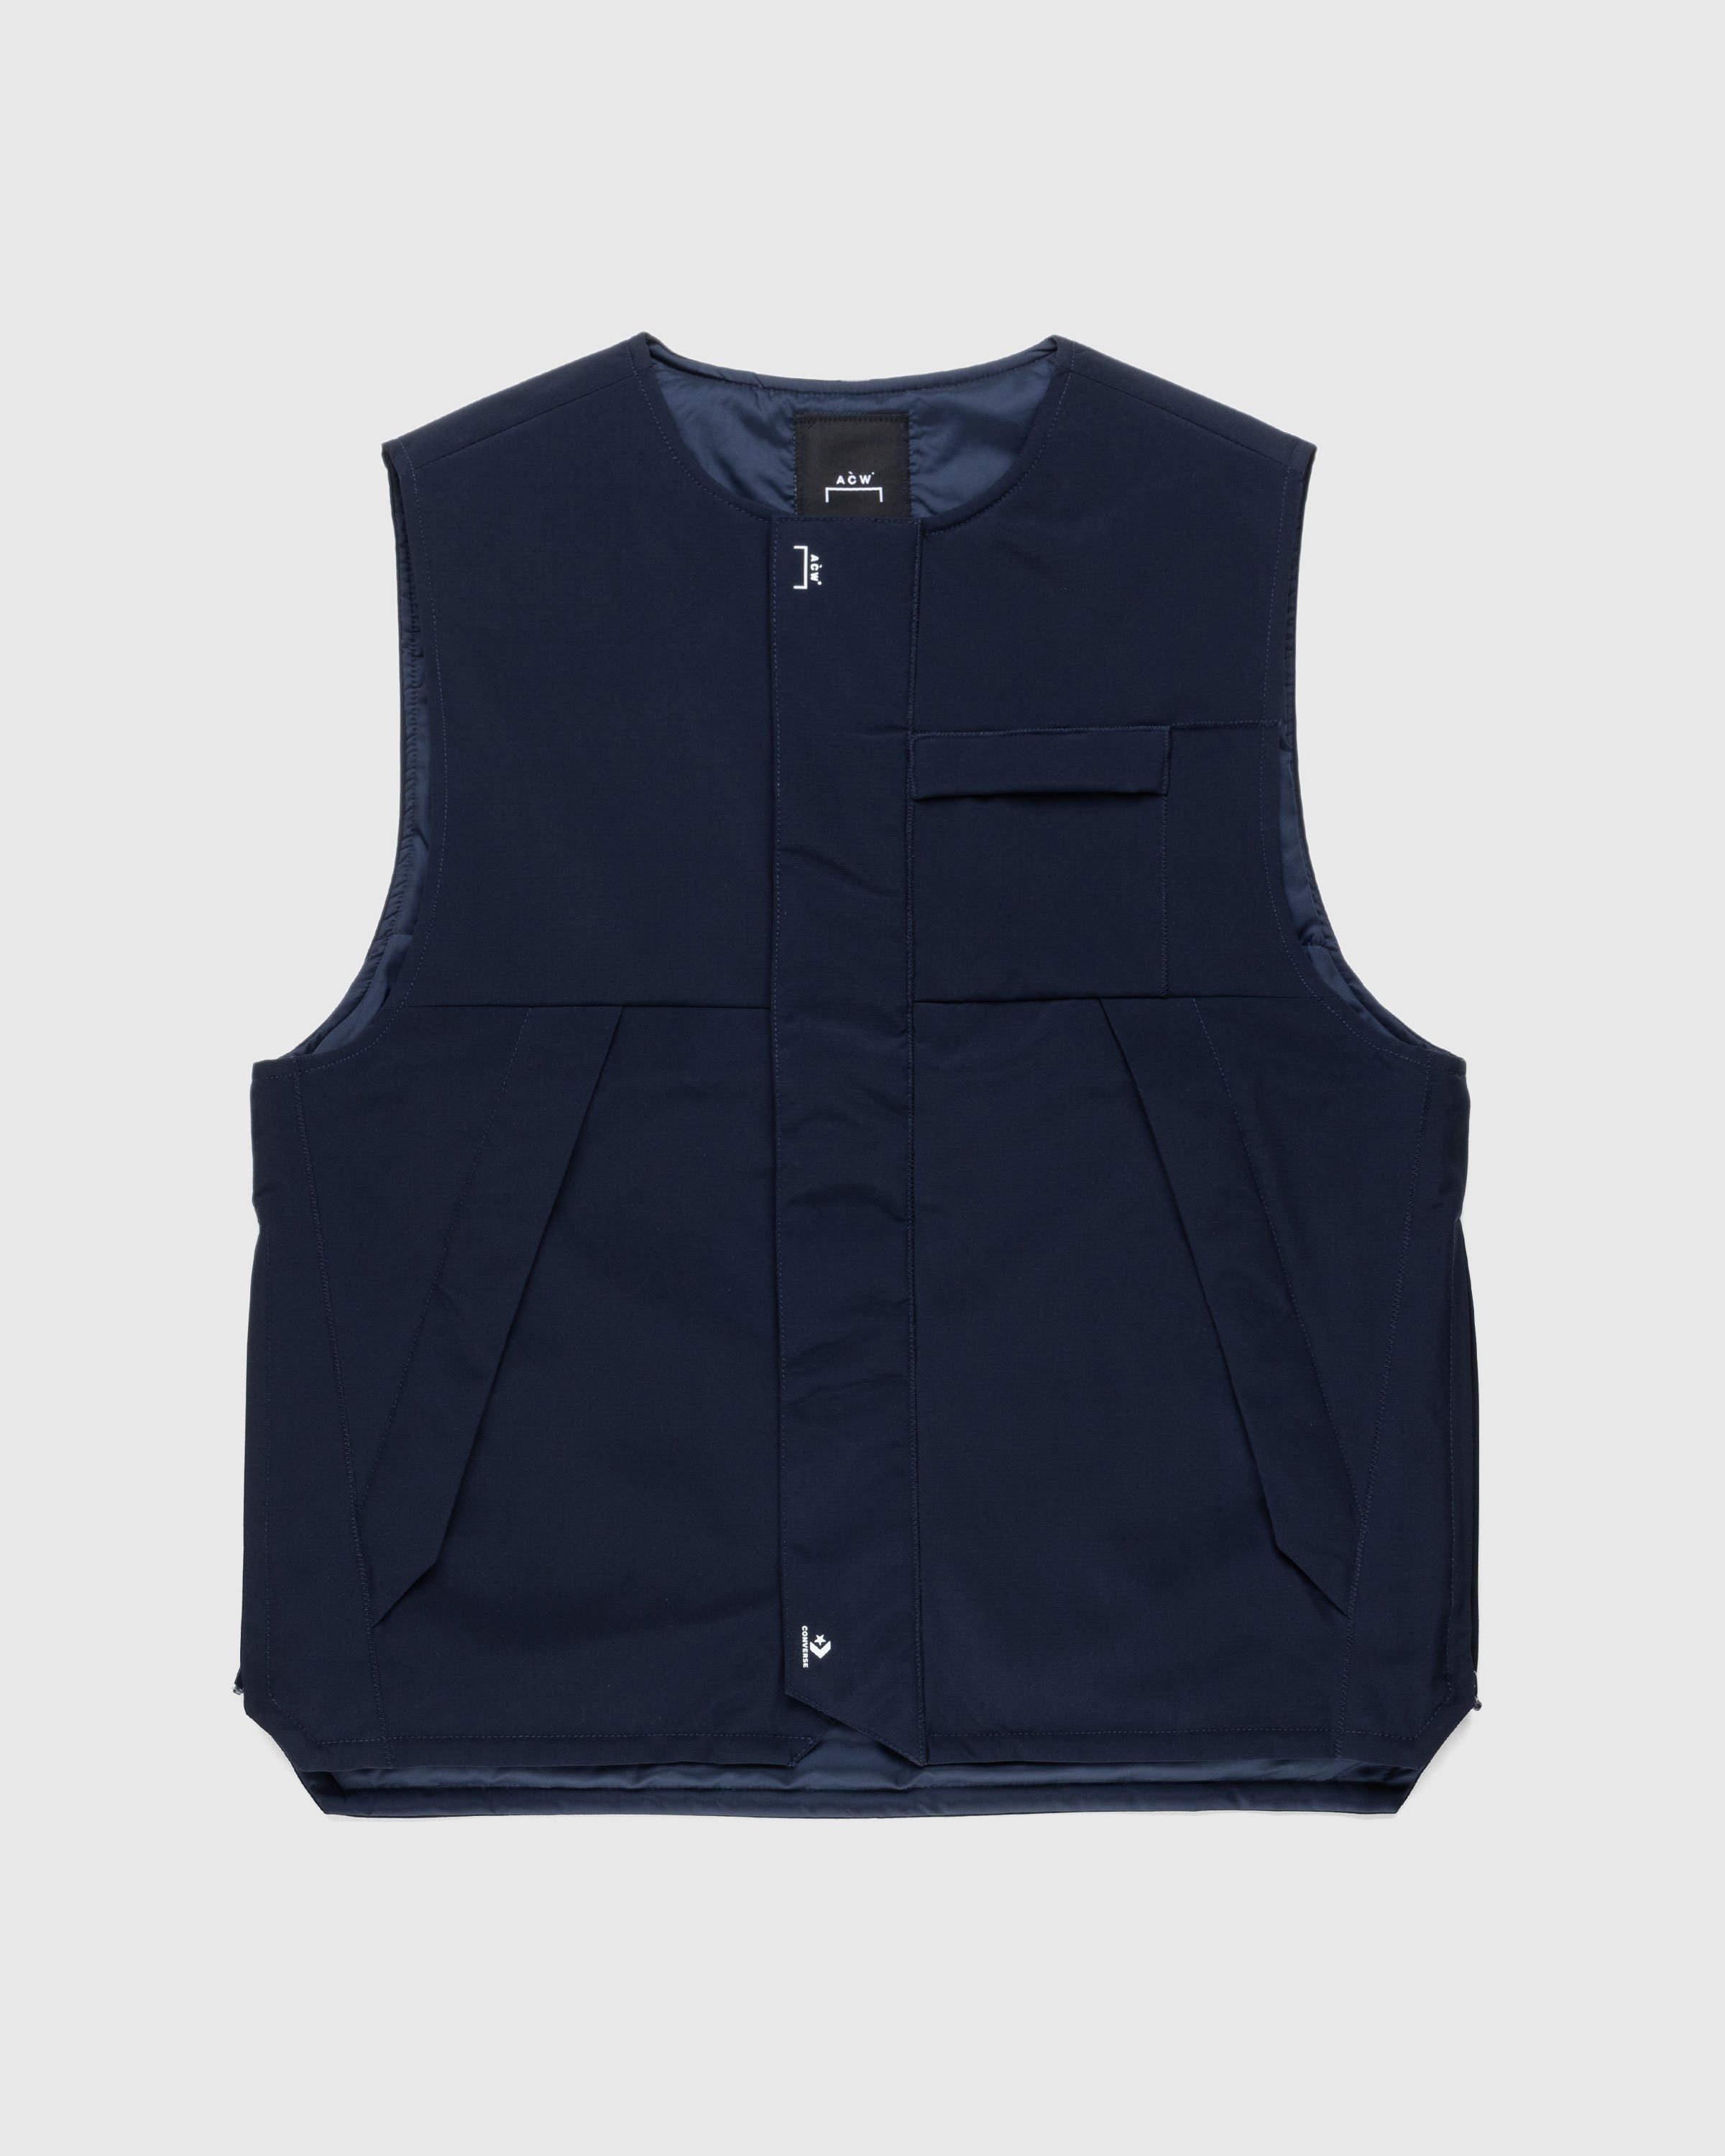 Converse x A-Cold-Wall* - Light Gilet Navy - Clothing - Blue - Image 1